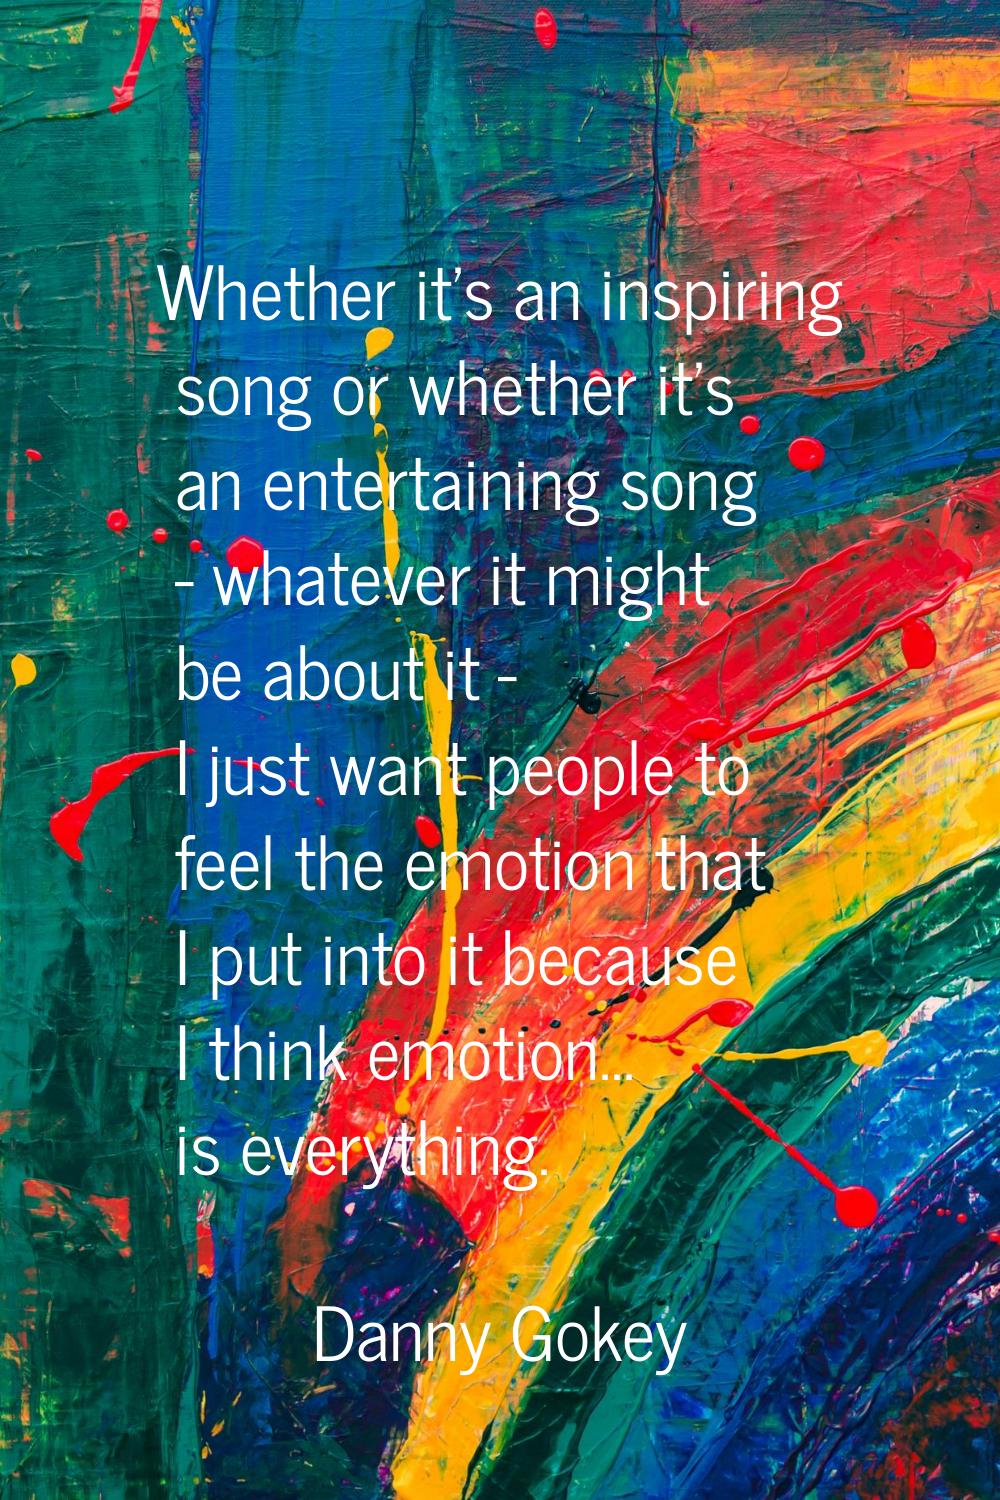 Whether it's an inspiring song or whether it's an entertaining song - whatever it might be about it